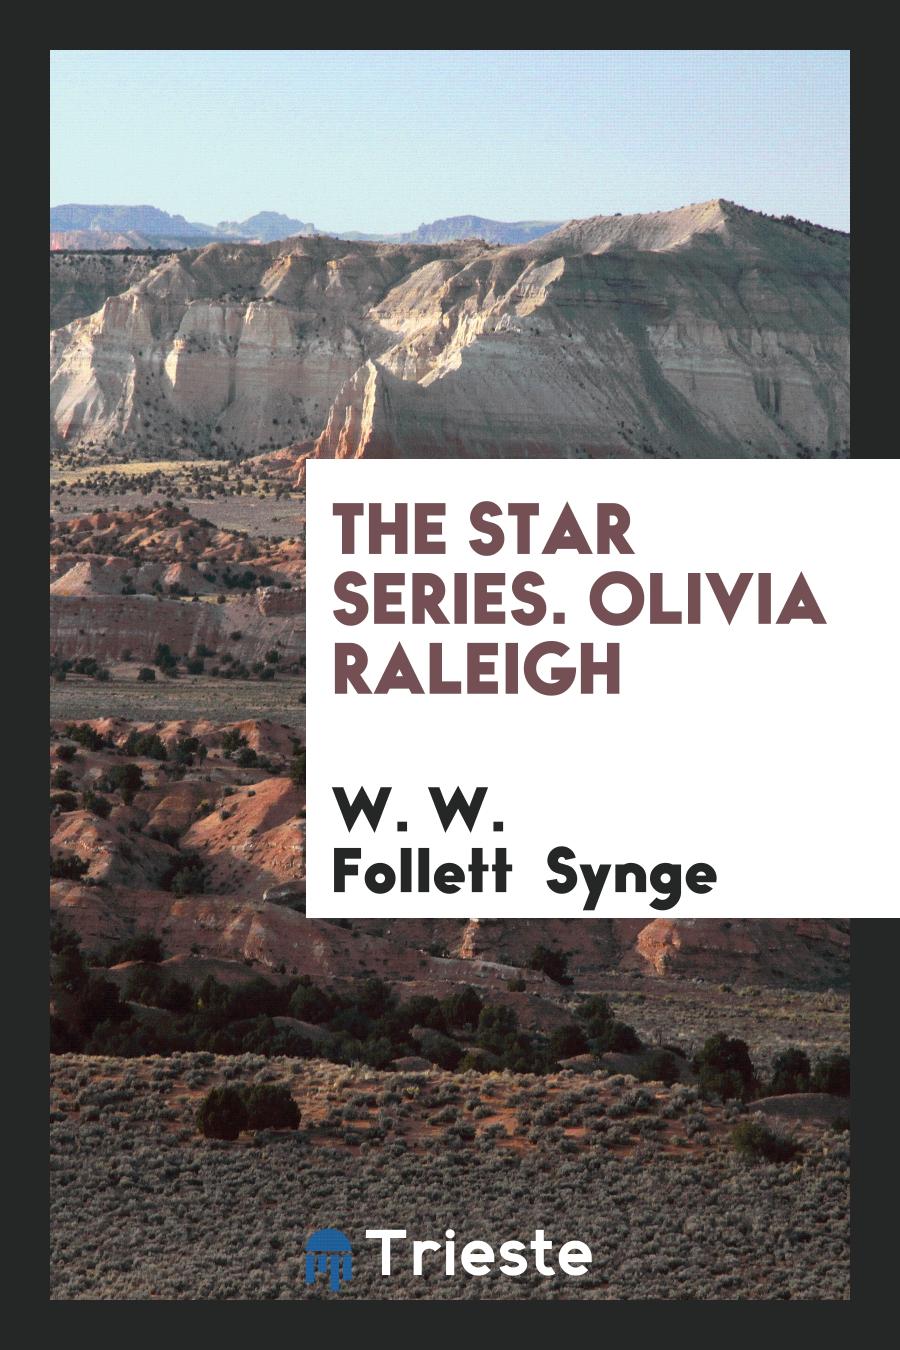 The Star Series. Olivia Raleigh